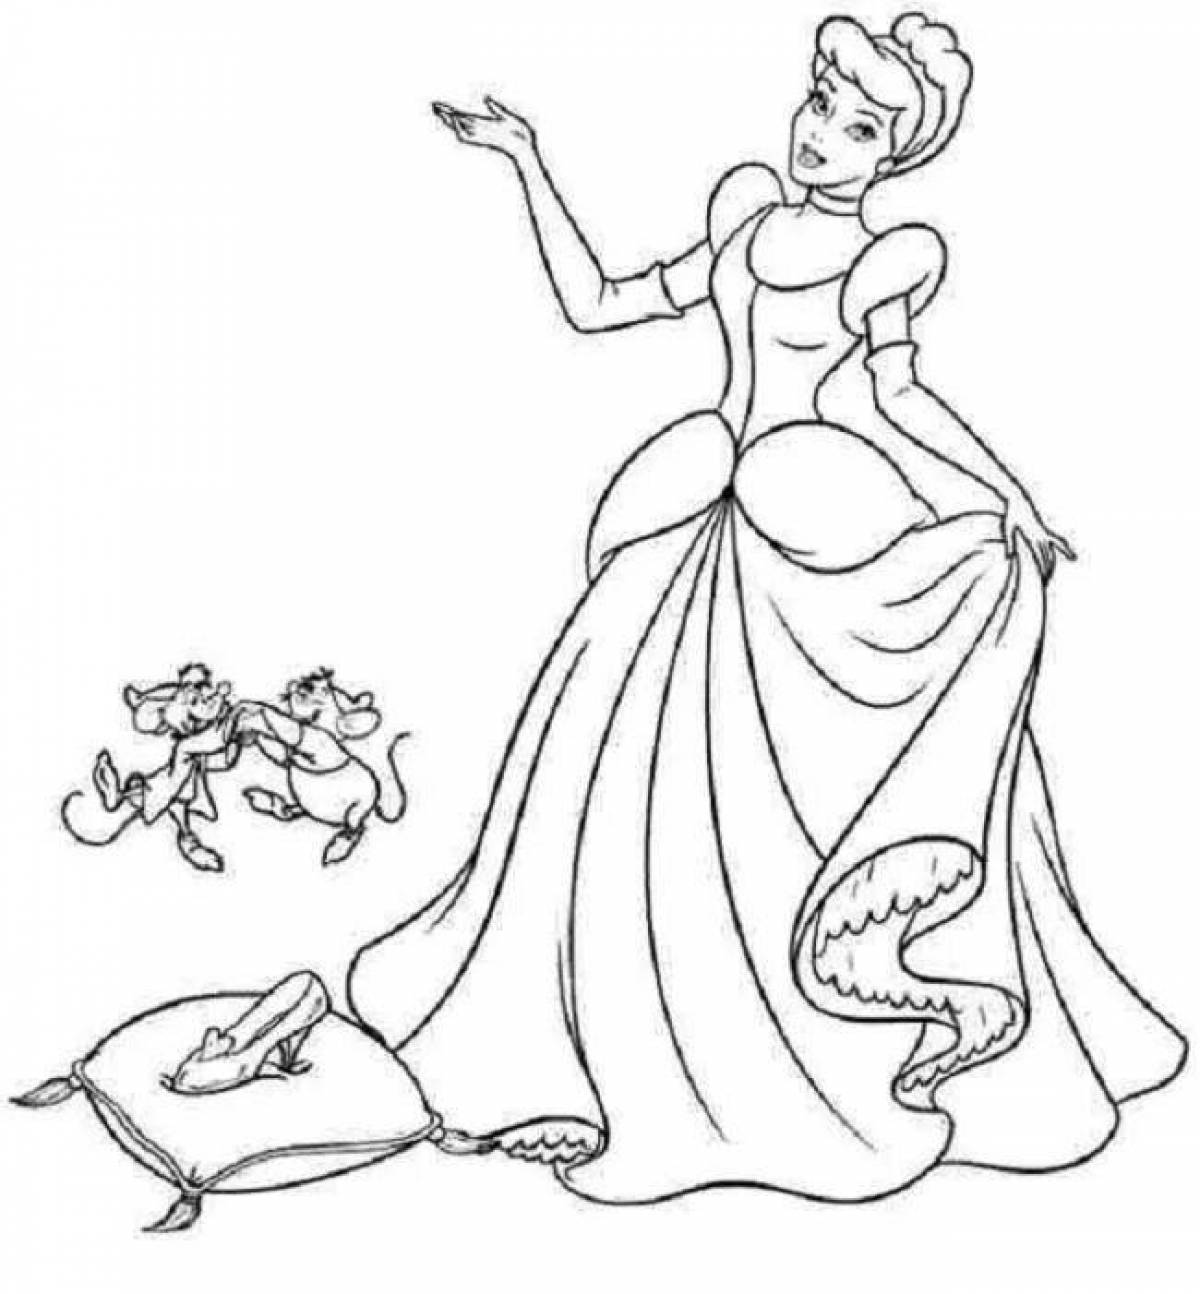 Cute Cinderella coloring book for kids 5-6 years old